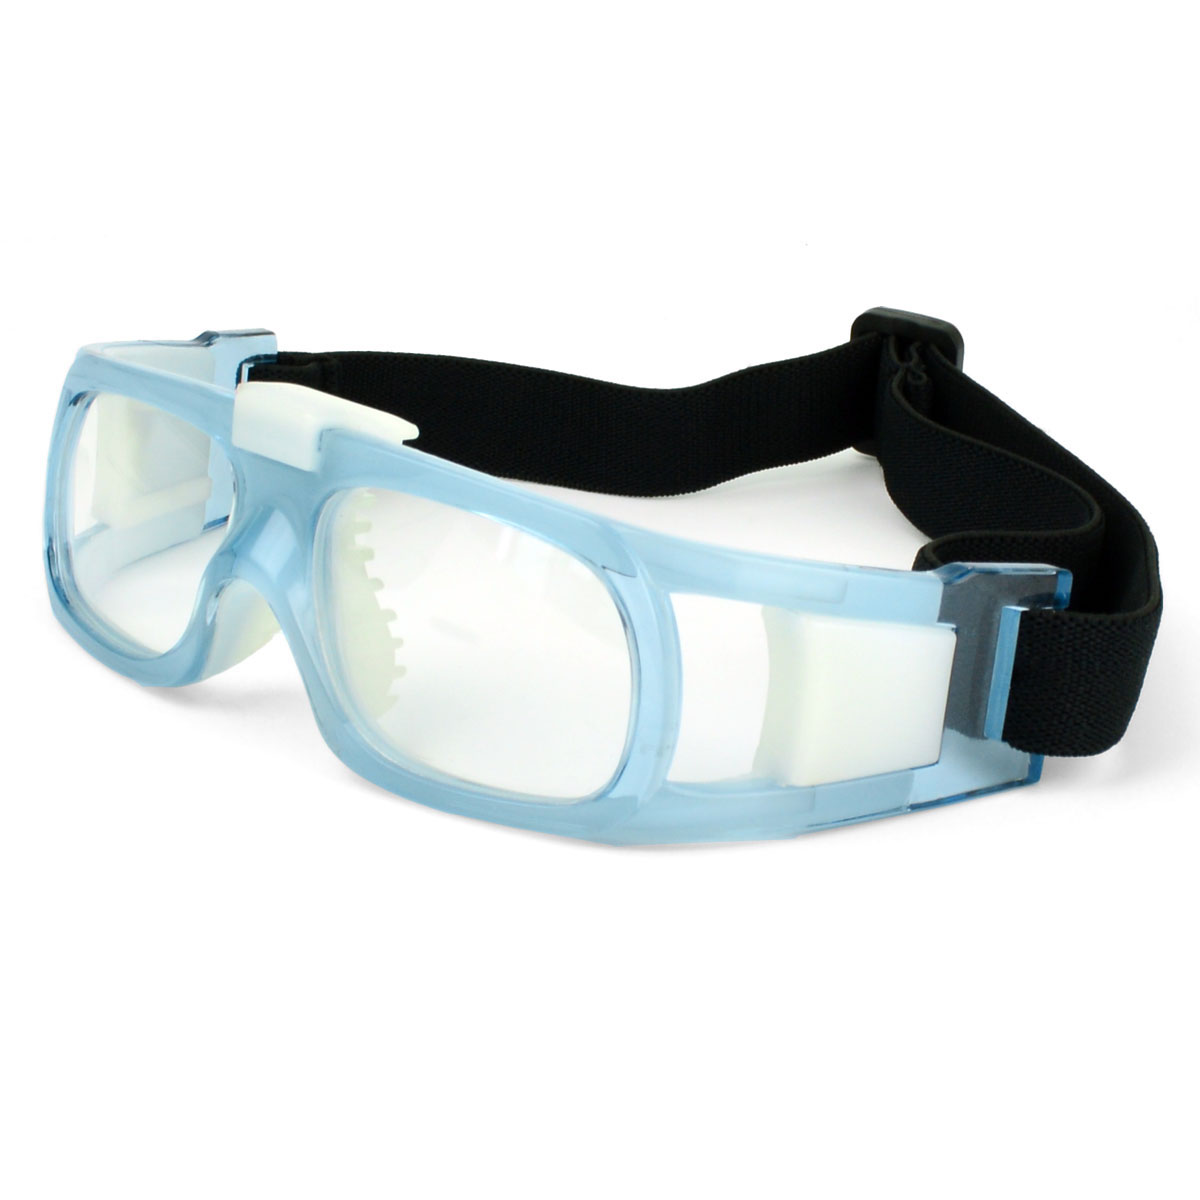 Comfortable Hard Coated PC Impact Proof Lens Basketball Goggles